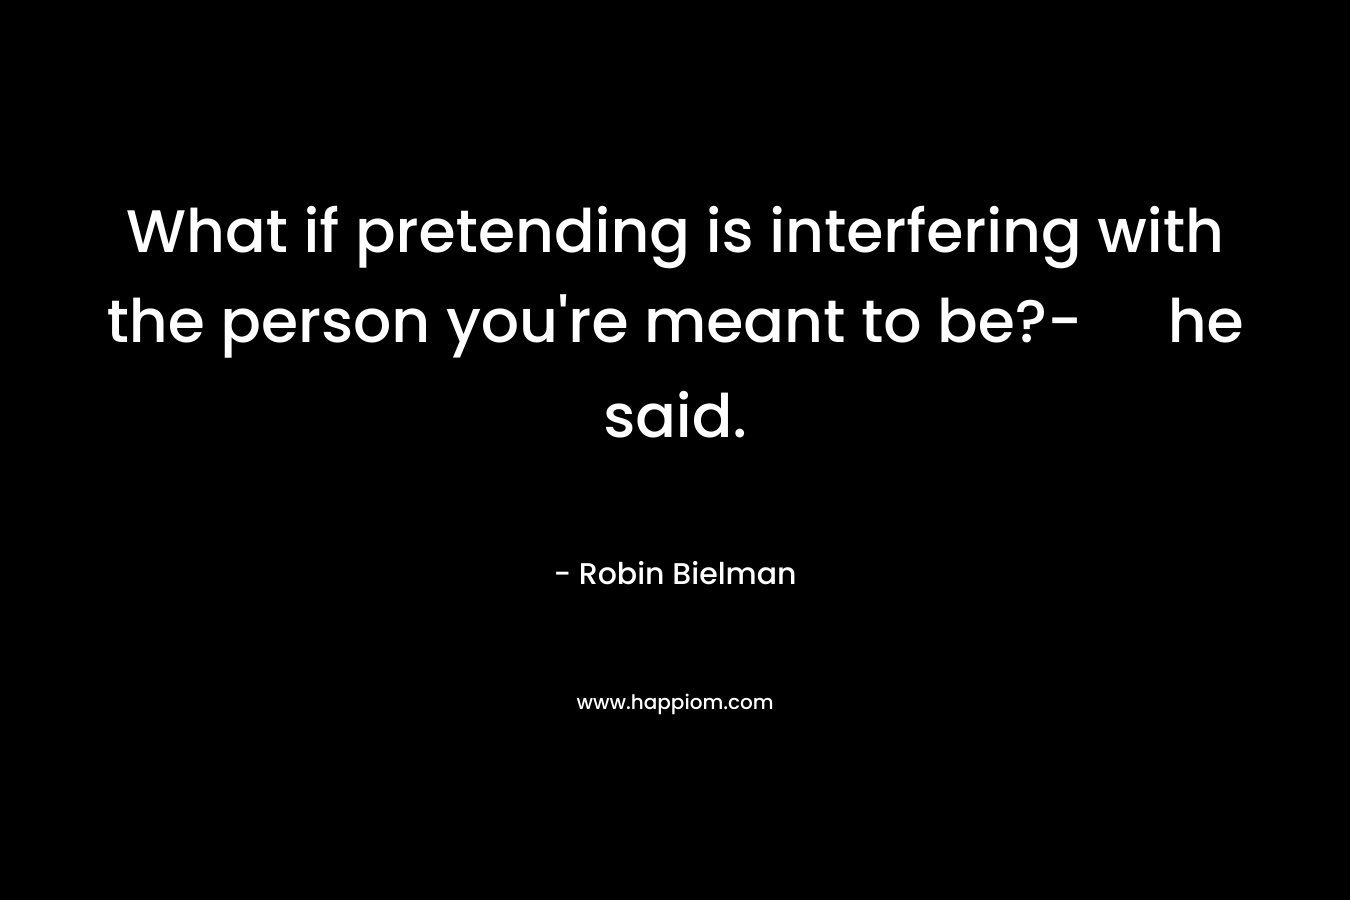 What if pretending is interfering with the person you're meant to be?- he said.